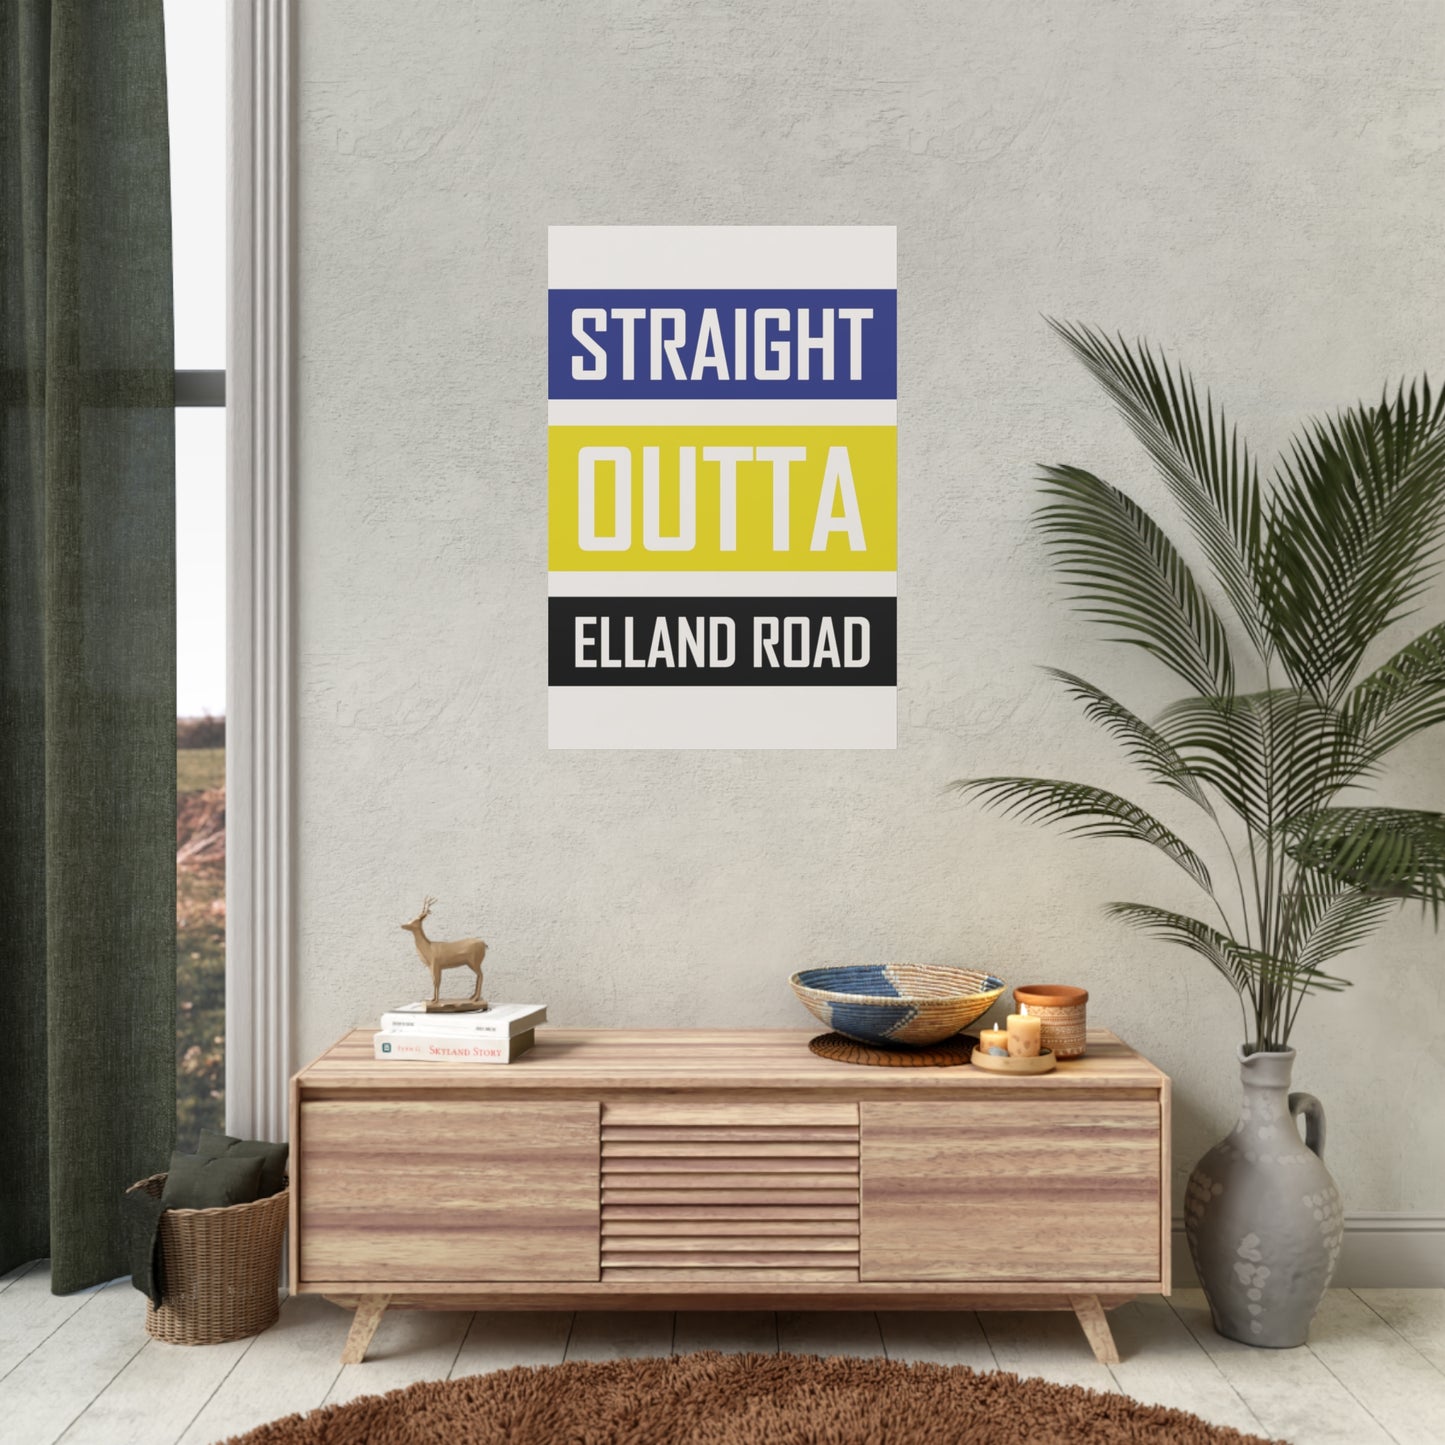 Poster with "Straight Outta Elland Road "written on it 